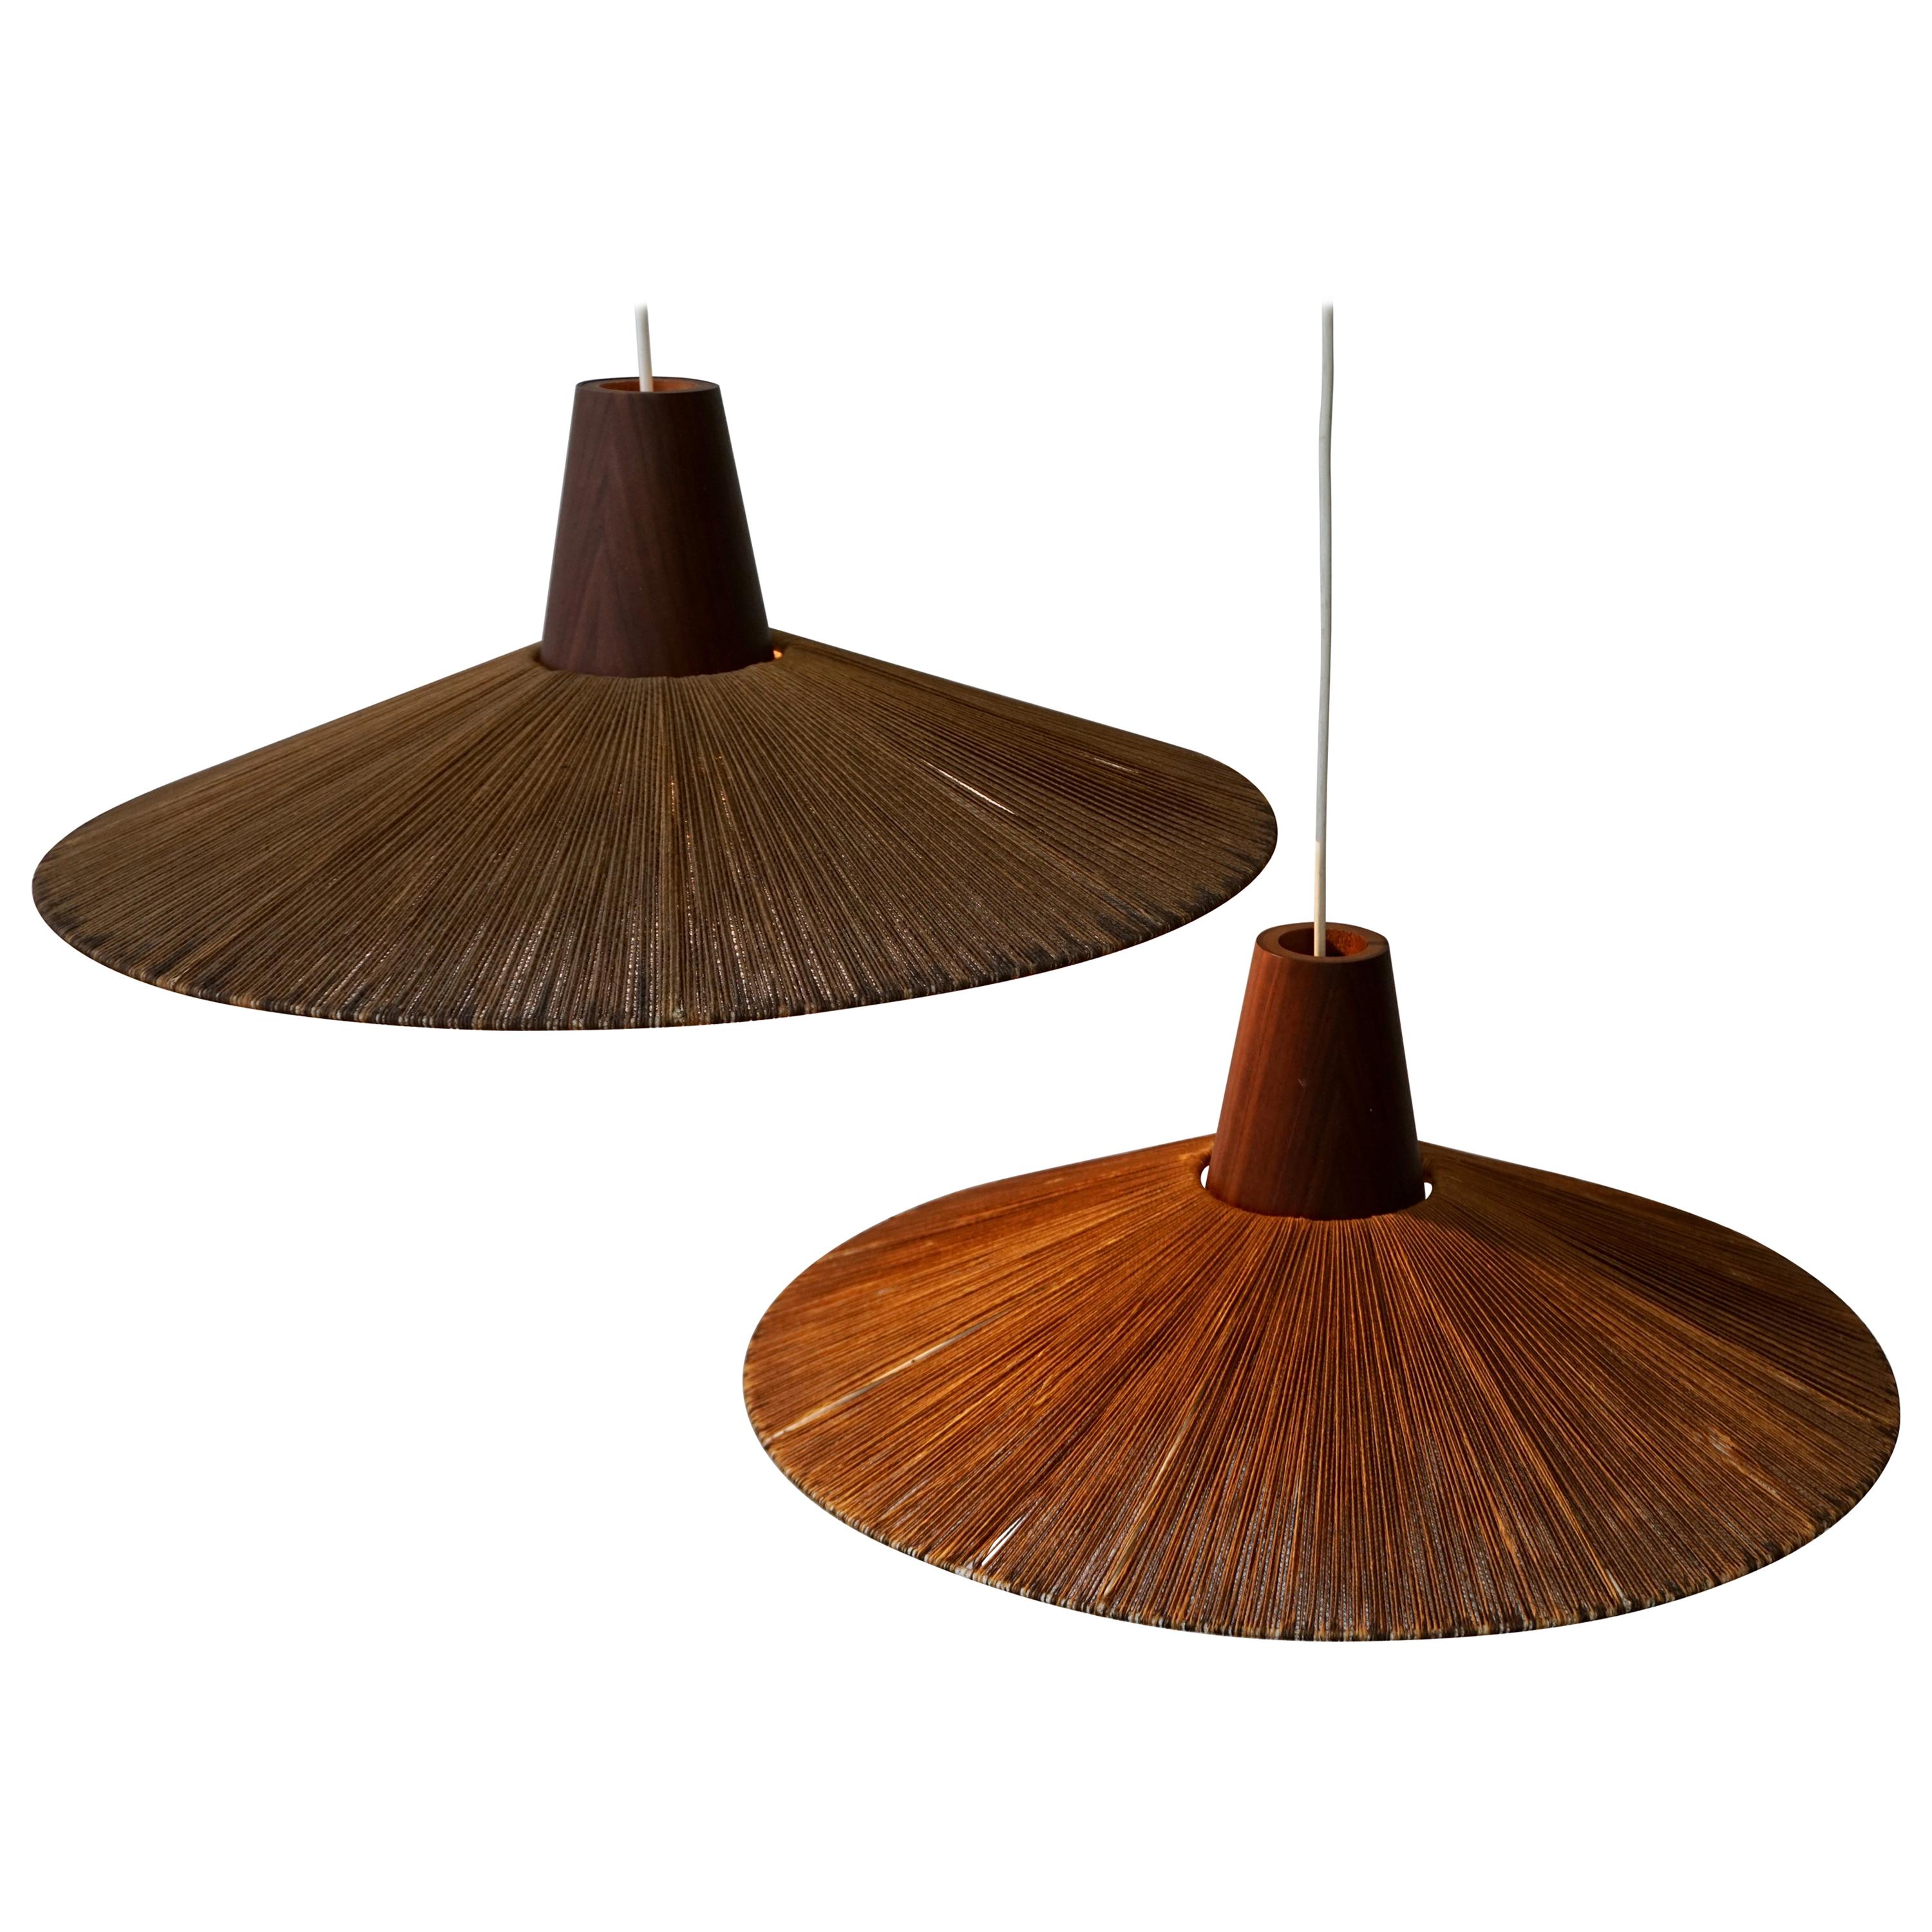 Two Teak and Cord Shade Hanging Lamps